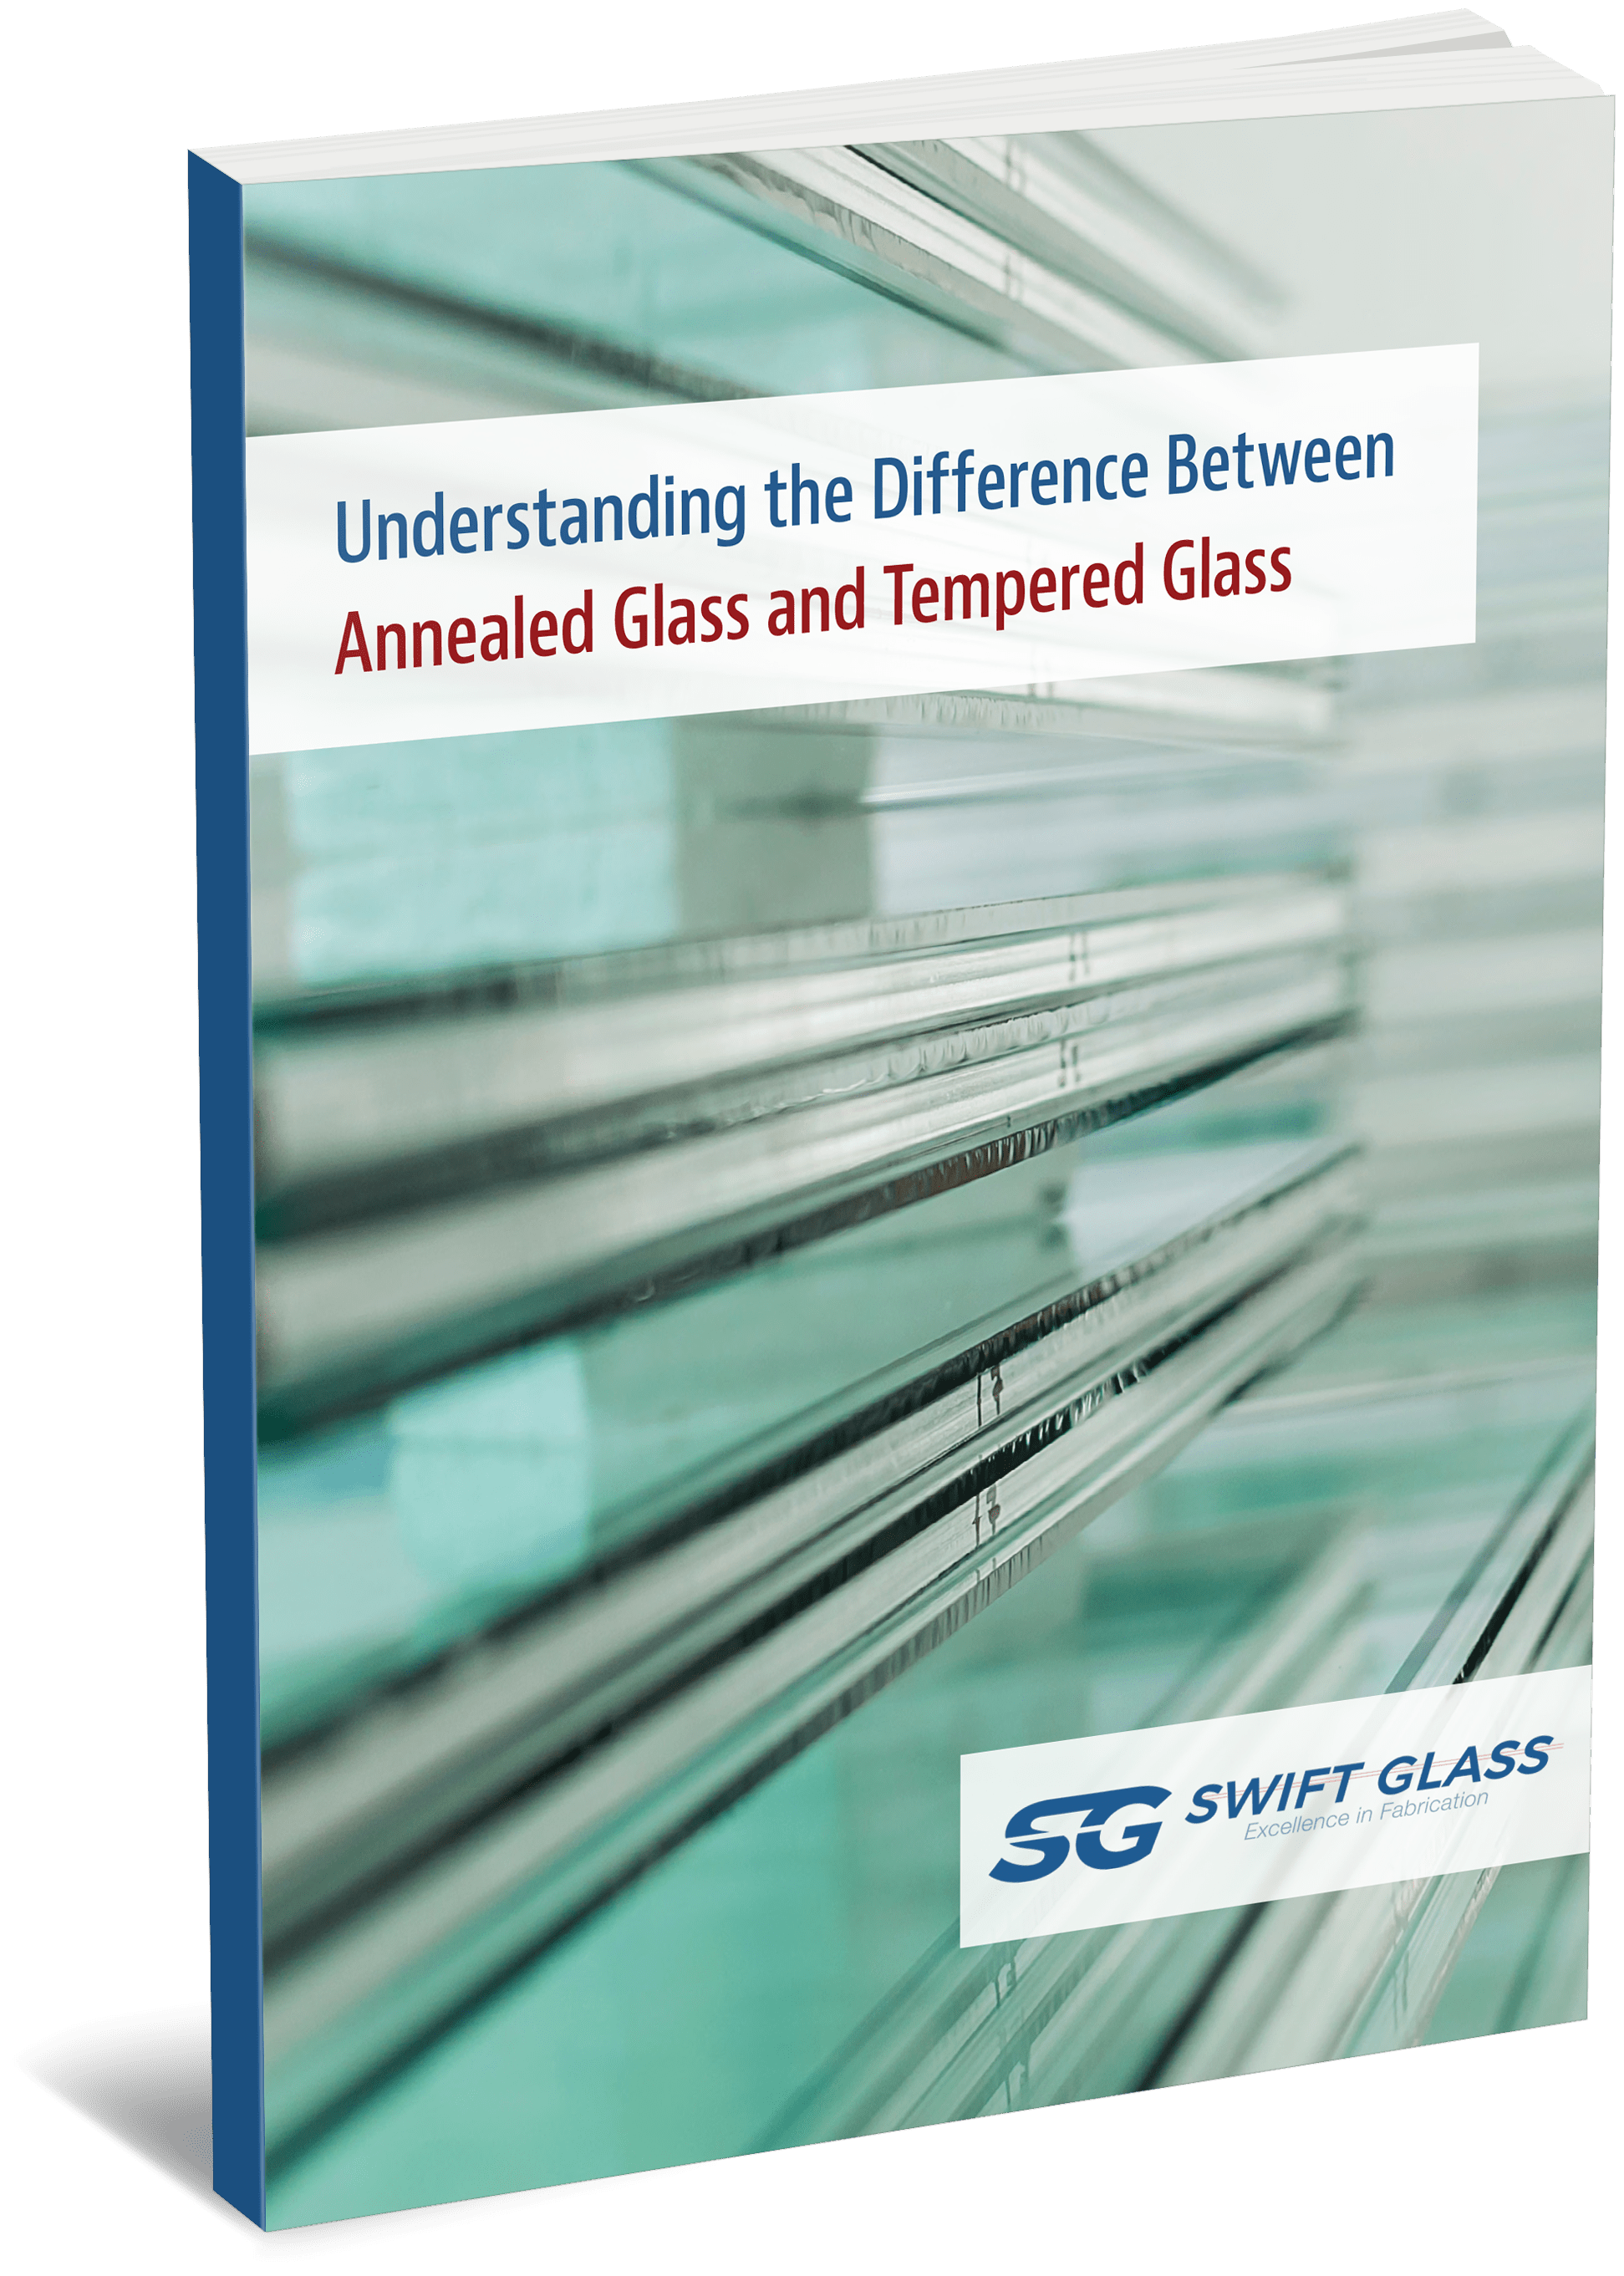 Understanding the Difference Between Annealed Glass and Tempered Glass